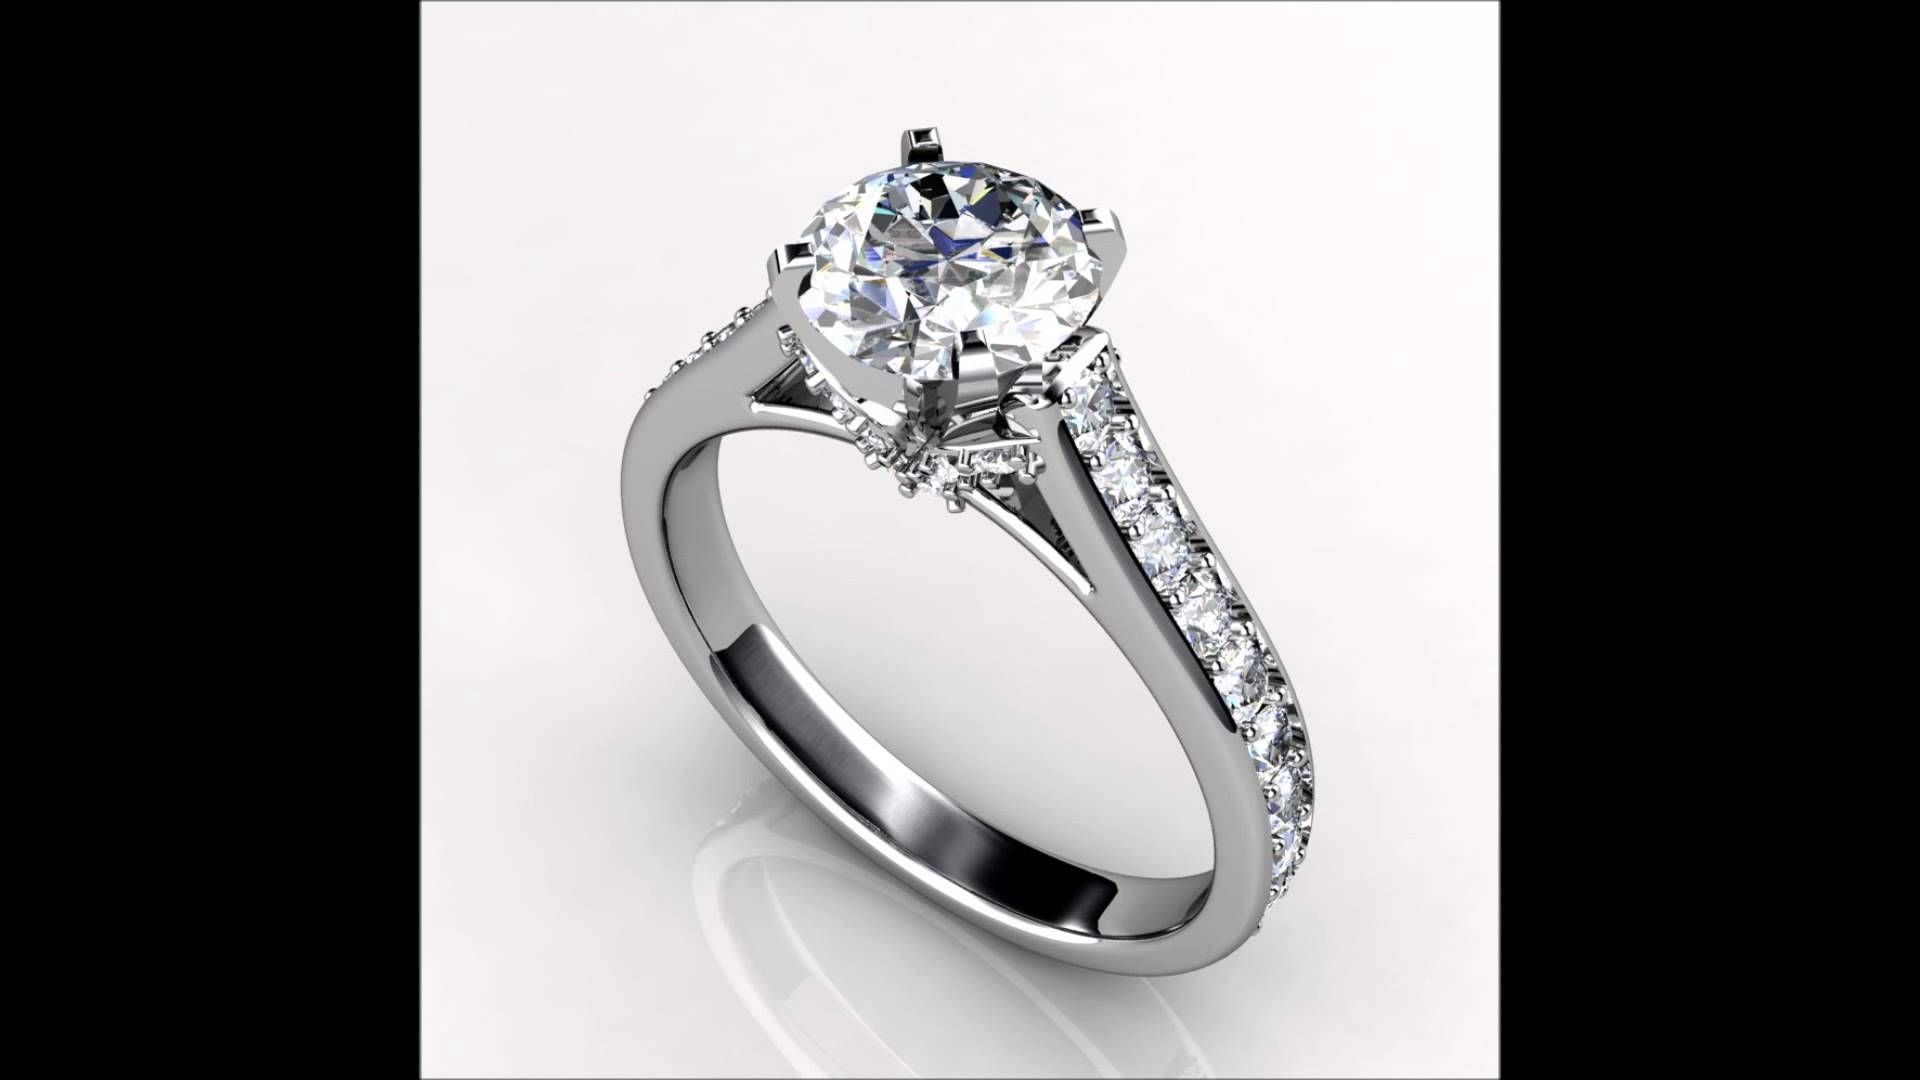 Bridal Sets Engagement Rings Promise Rings Solitaire Engagement Intended For Chicago Wedding Rings (View 12 of 15)